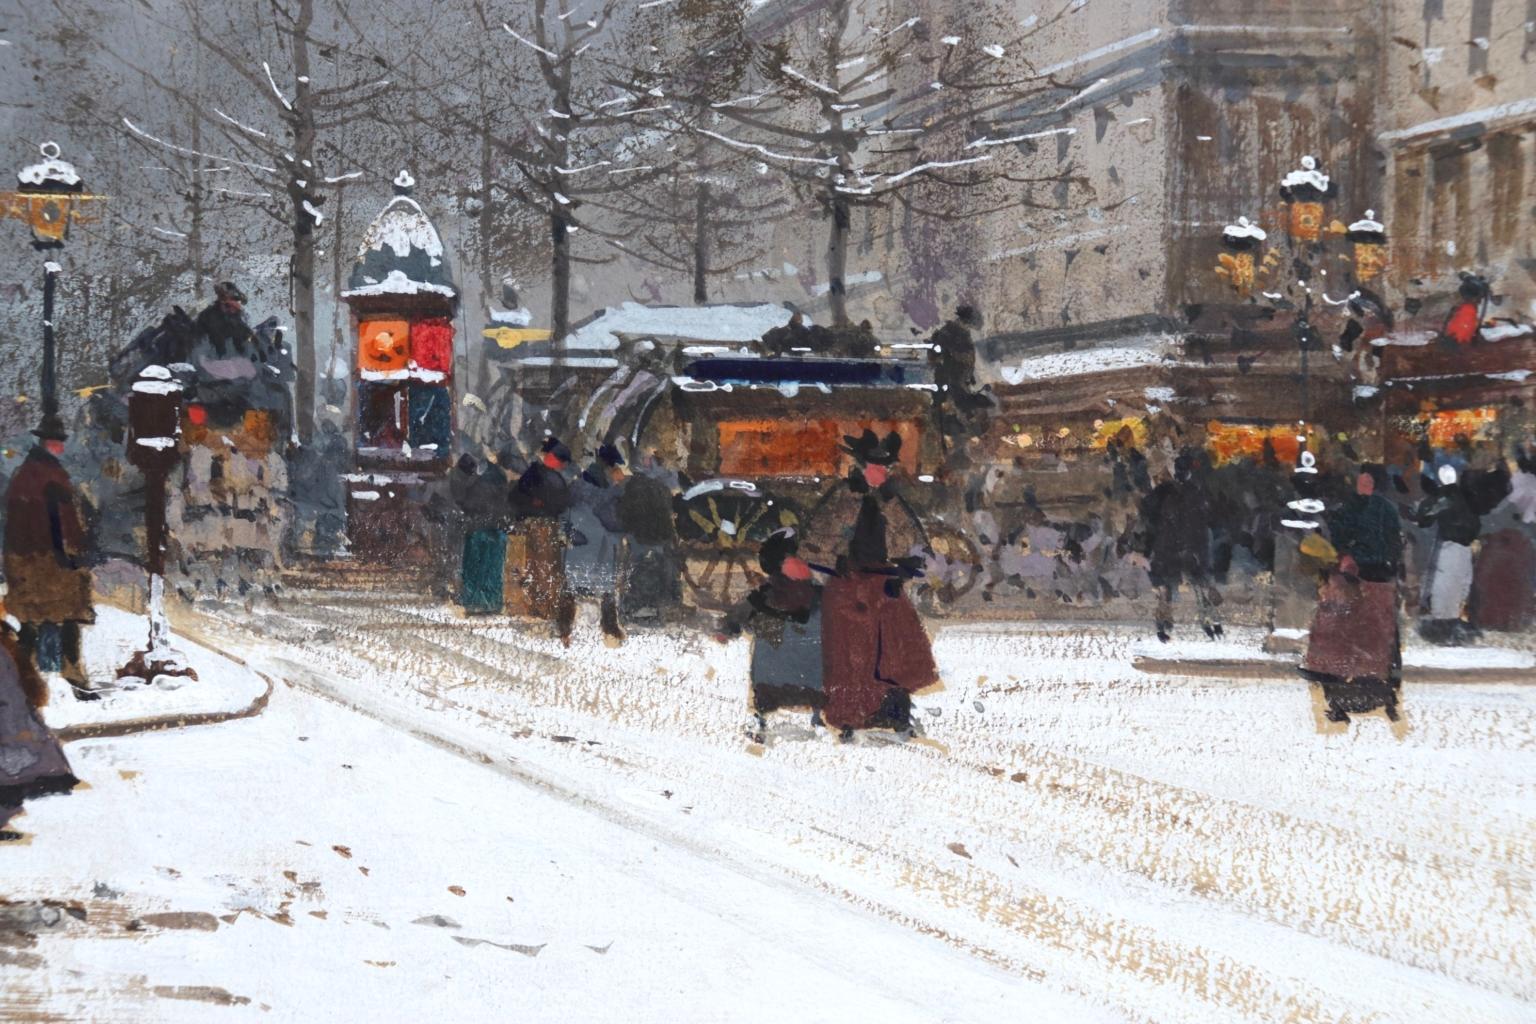 A beautiful gouache on paper circa 1900 by French impressionist painter Eugene Galien-Laloue depicting figures on the snowy streets of Paris. Signed lower left. 

Dimensions:
Framed: 13